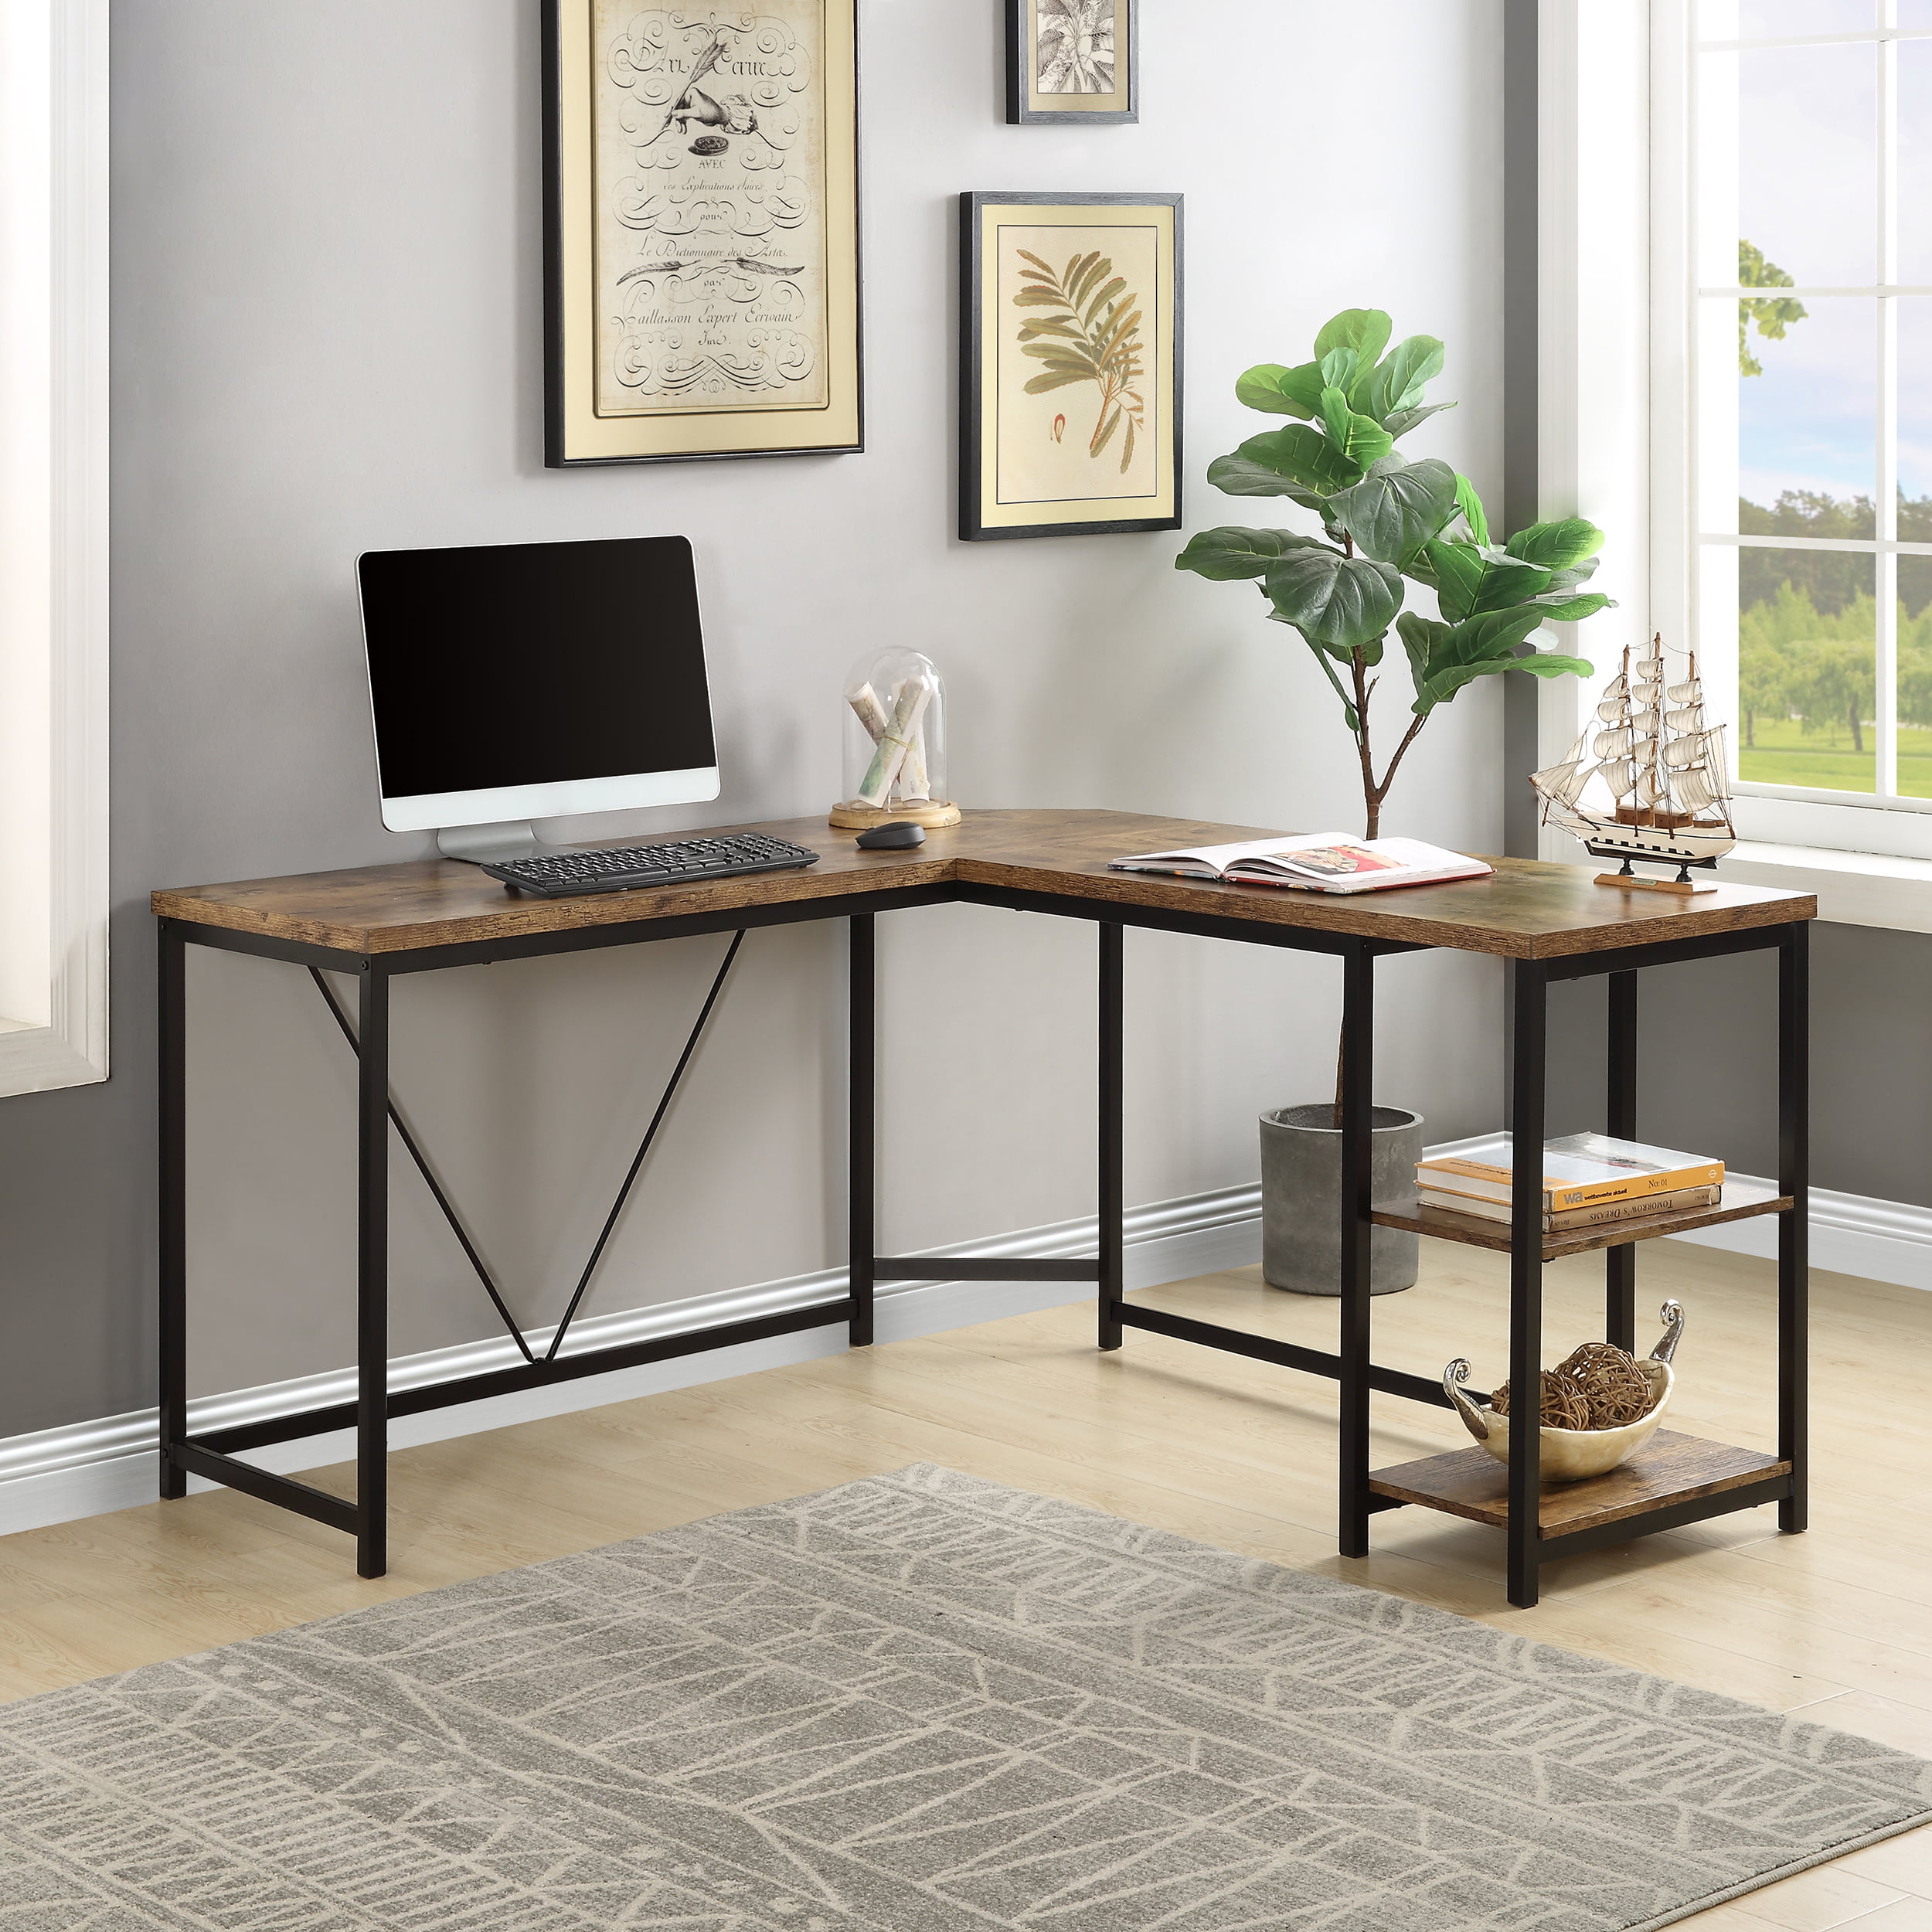 Office Home Study Corner Desk Computer PC Writing Table WorkStation Wooden Metal 